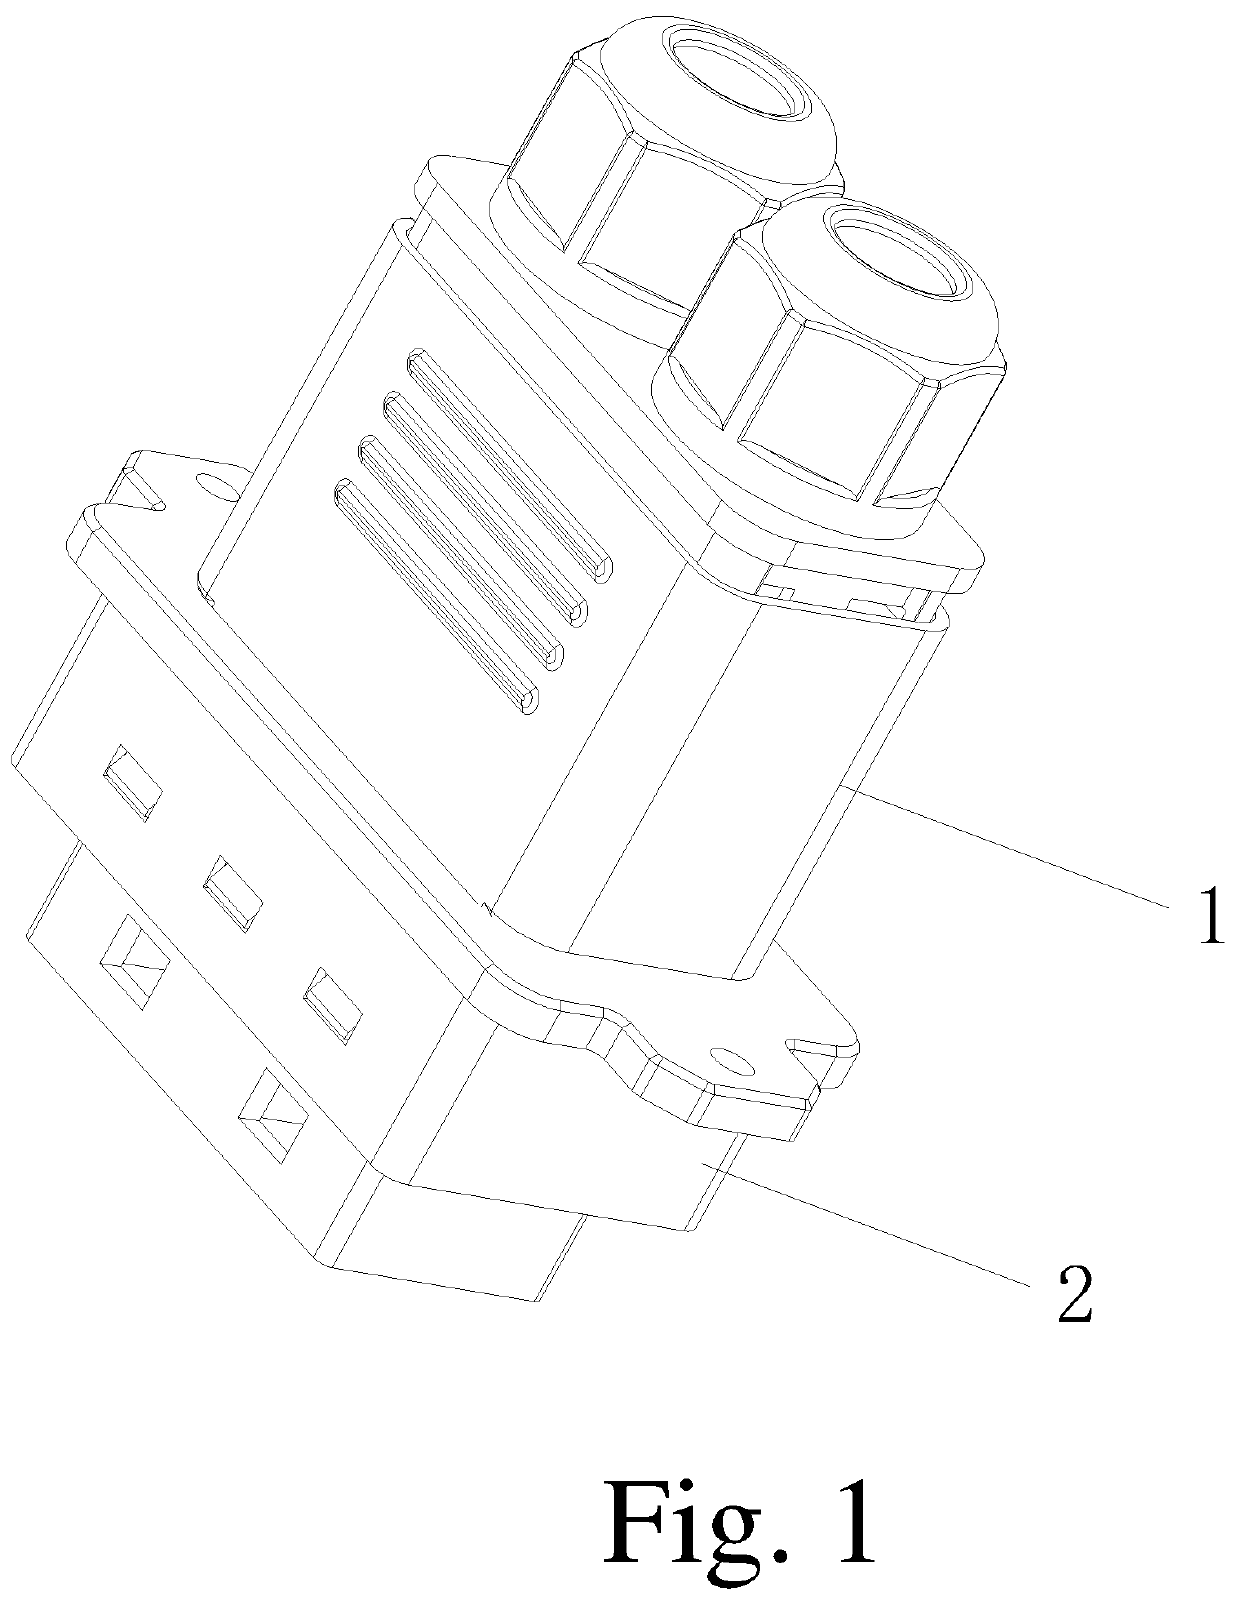 Safe electrical connector having replaceable interface